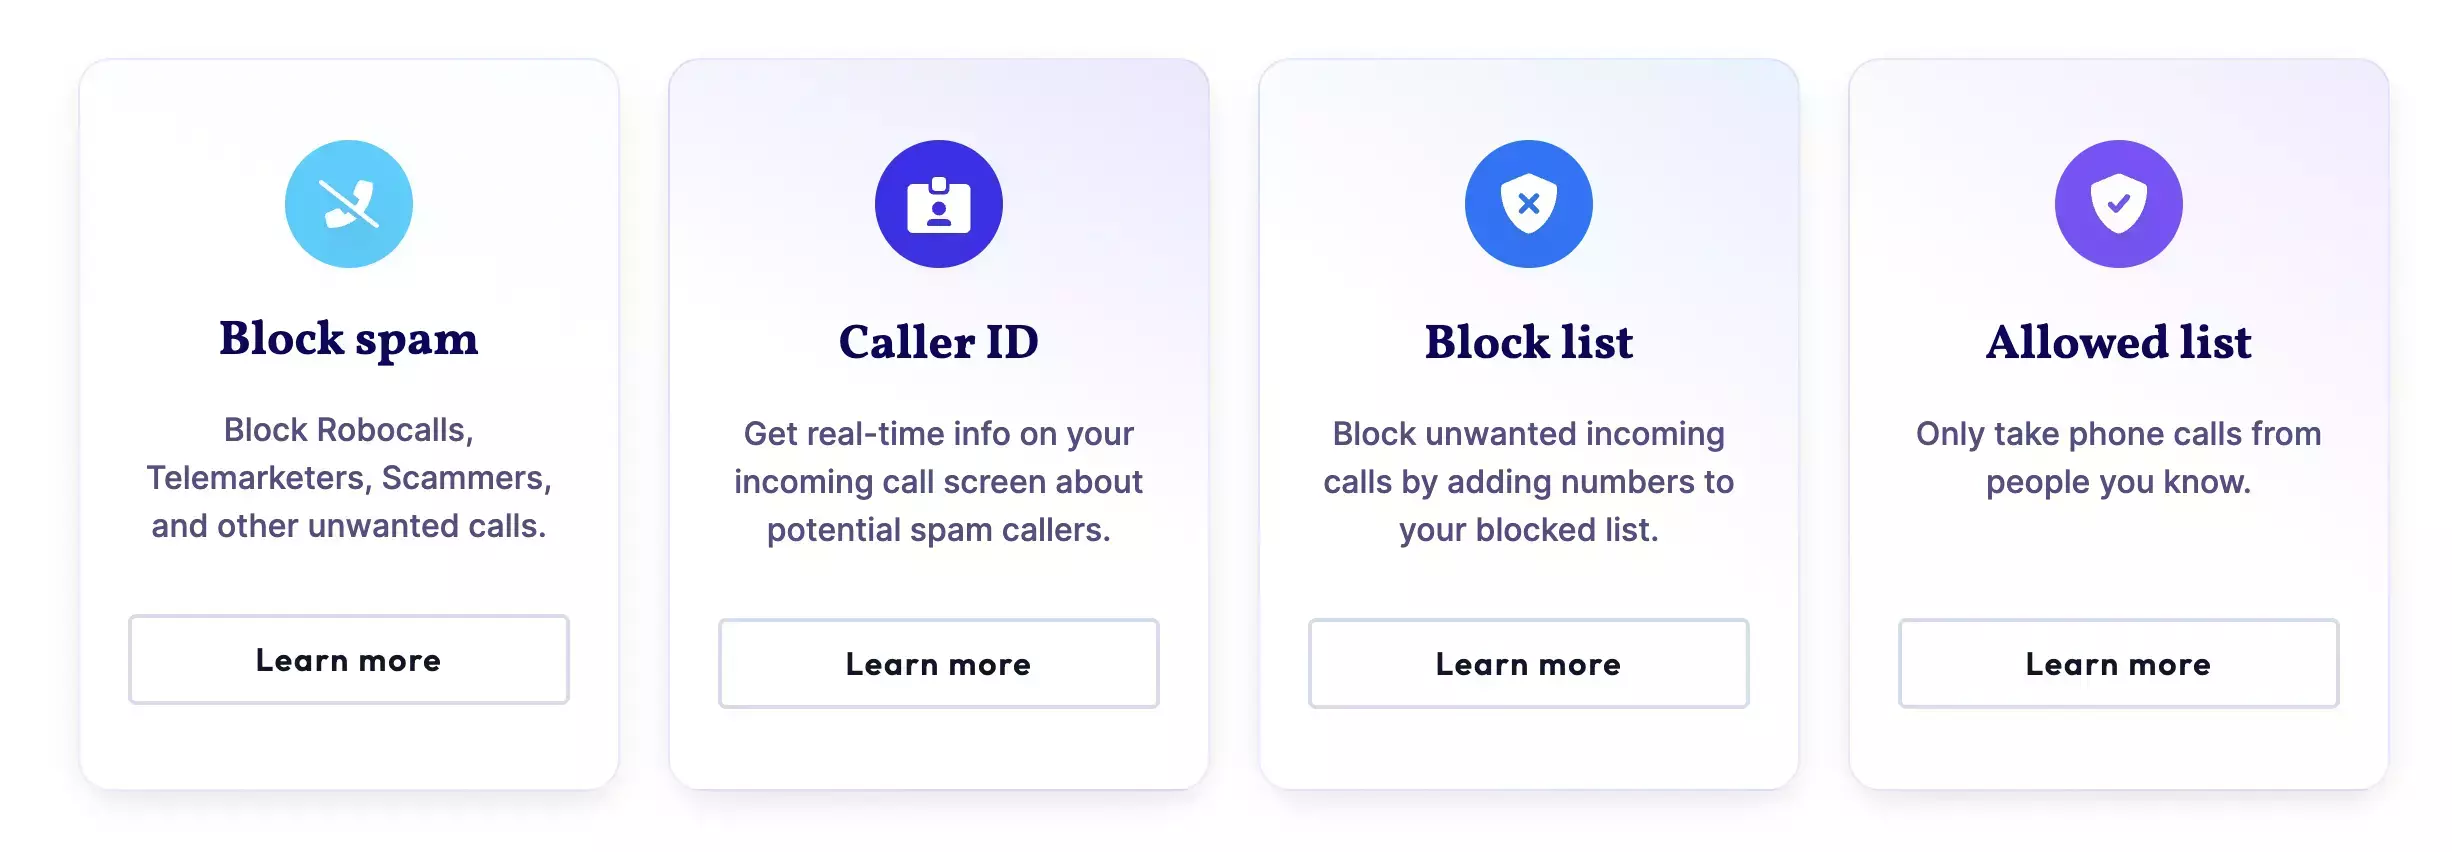 Image of Community Phone spam call blocker services